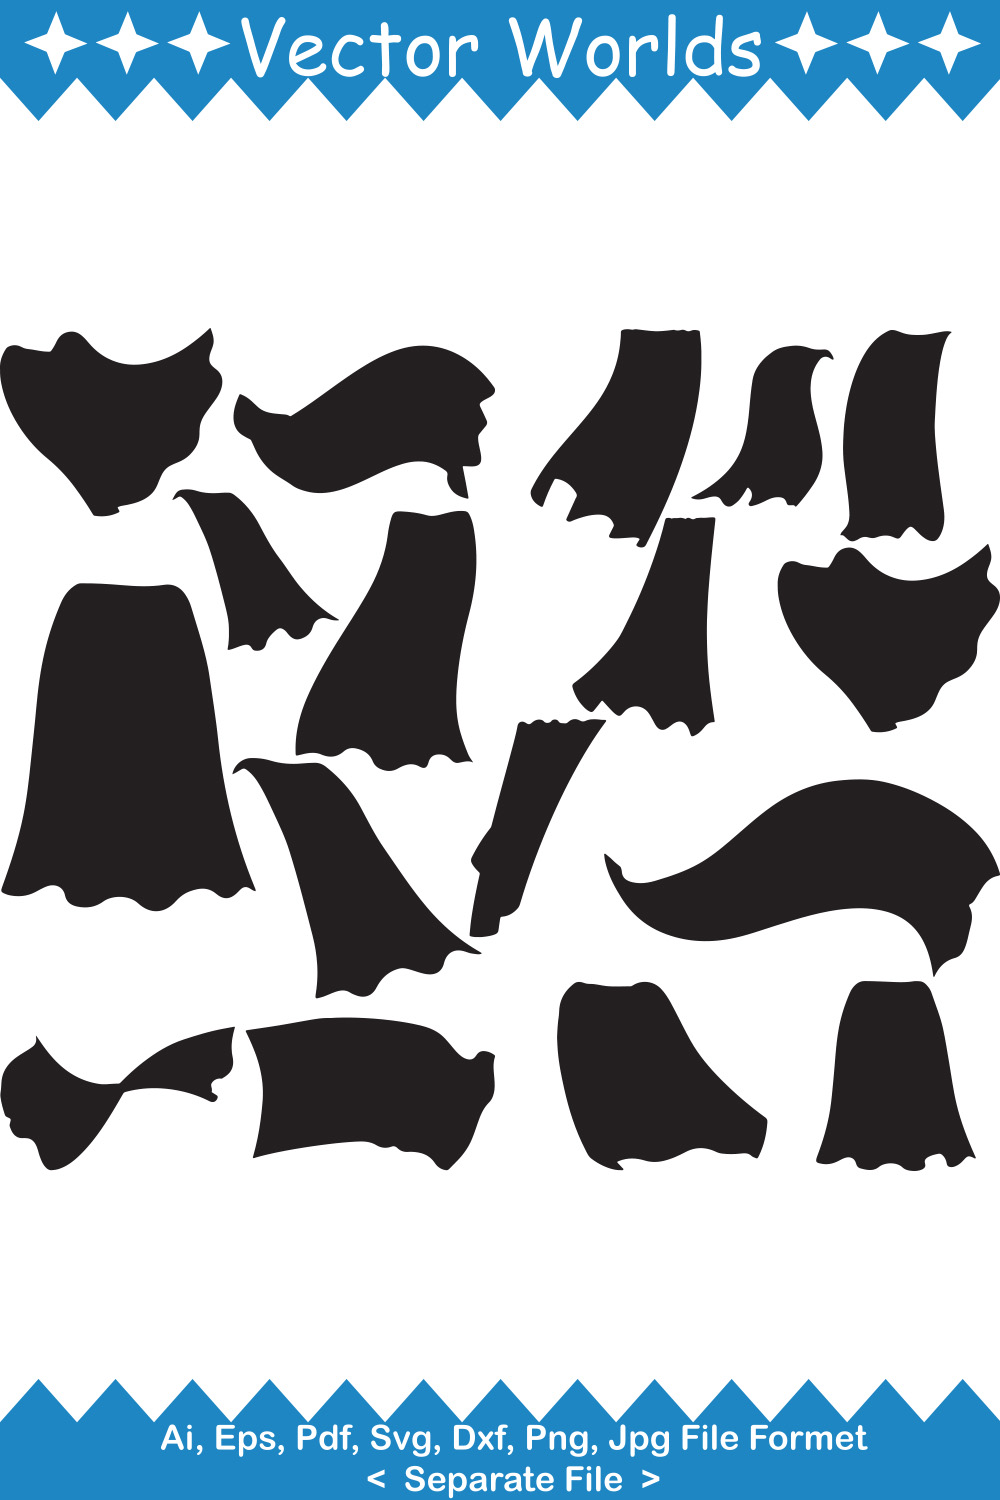 A selection of unique vector images of the silhouettes of cloth flying